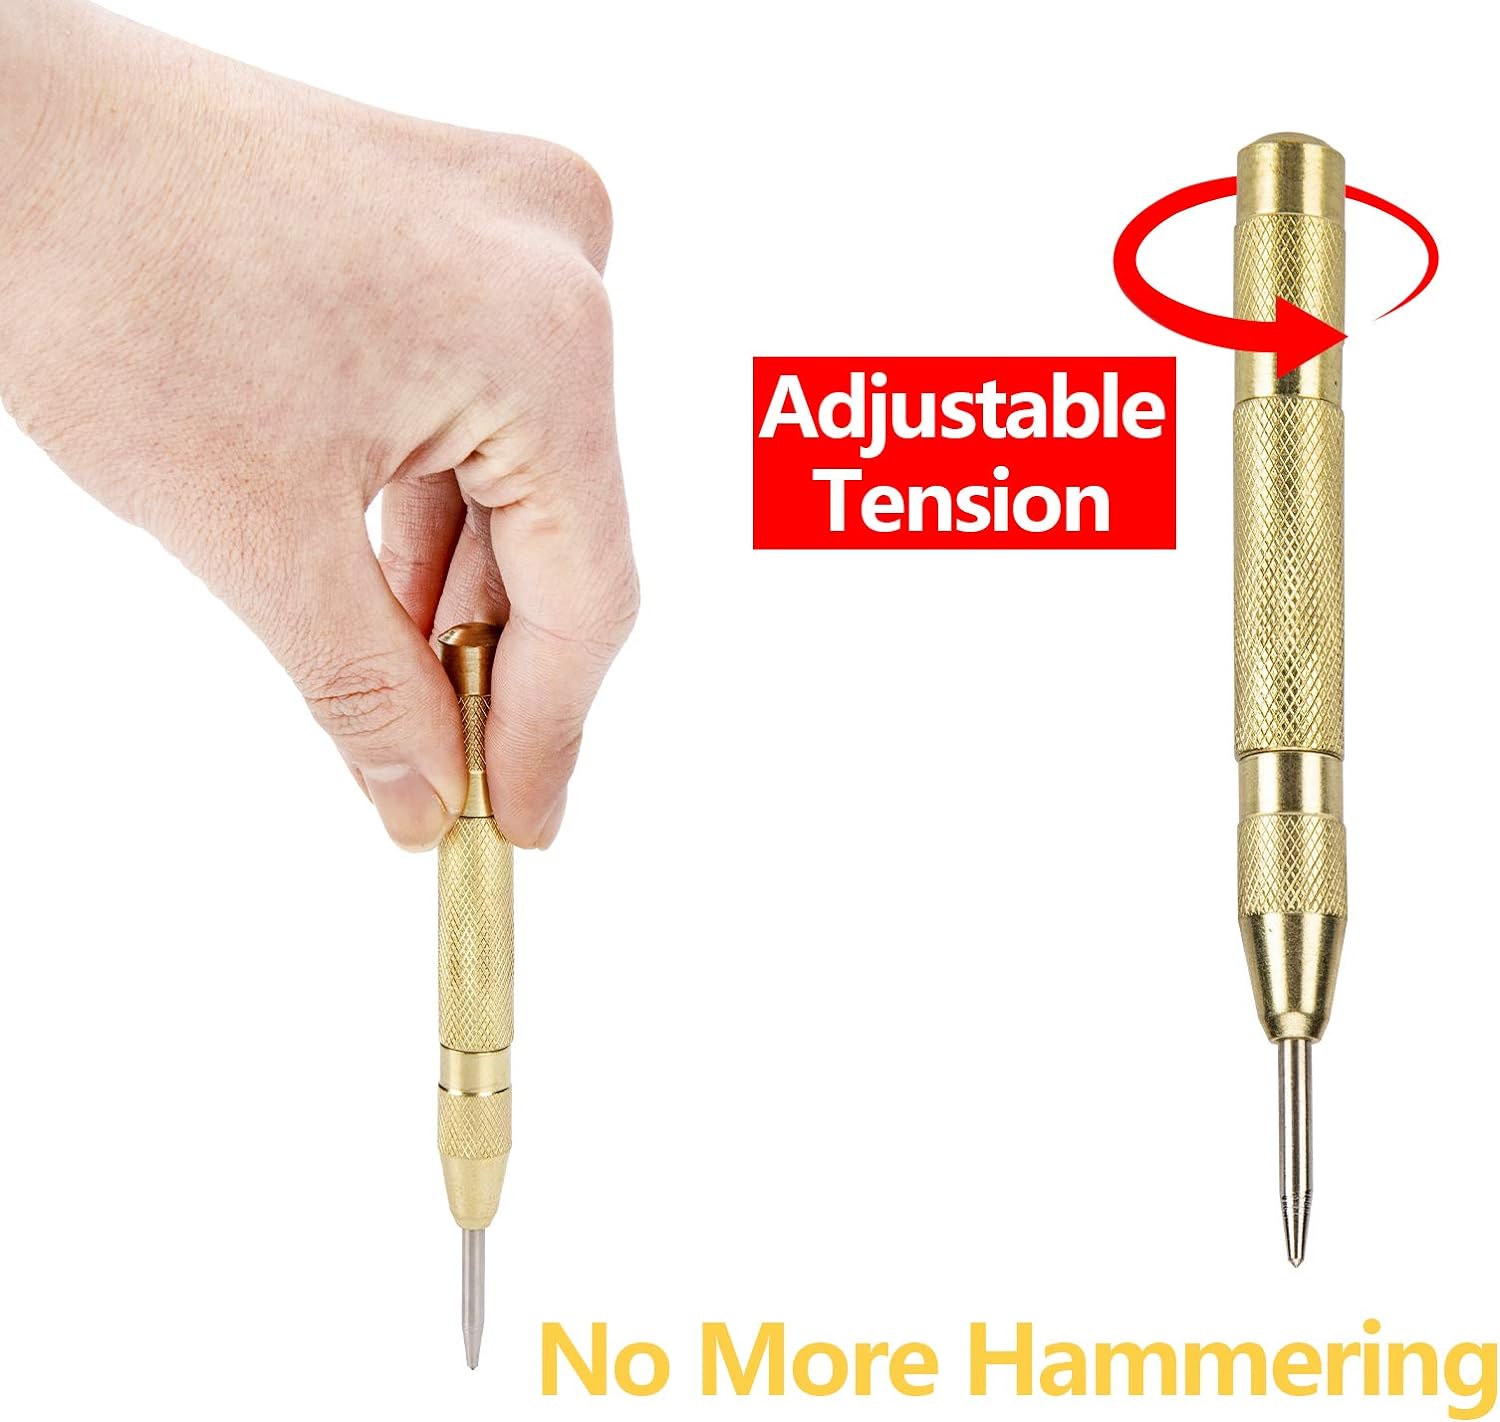 Jieyang Jianye Industrial Co., Automatic Center Punch, Entemah 5 Inch Heavy Duty Brass Spring Loaded Center Hole Punch (2 Pack)